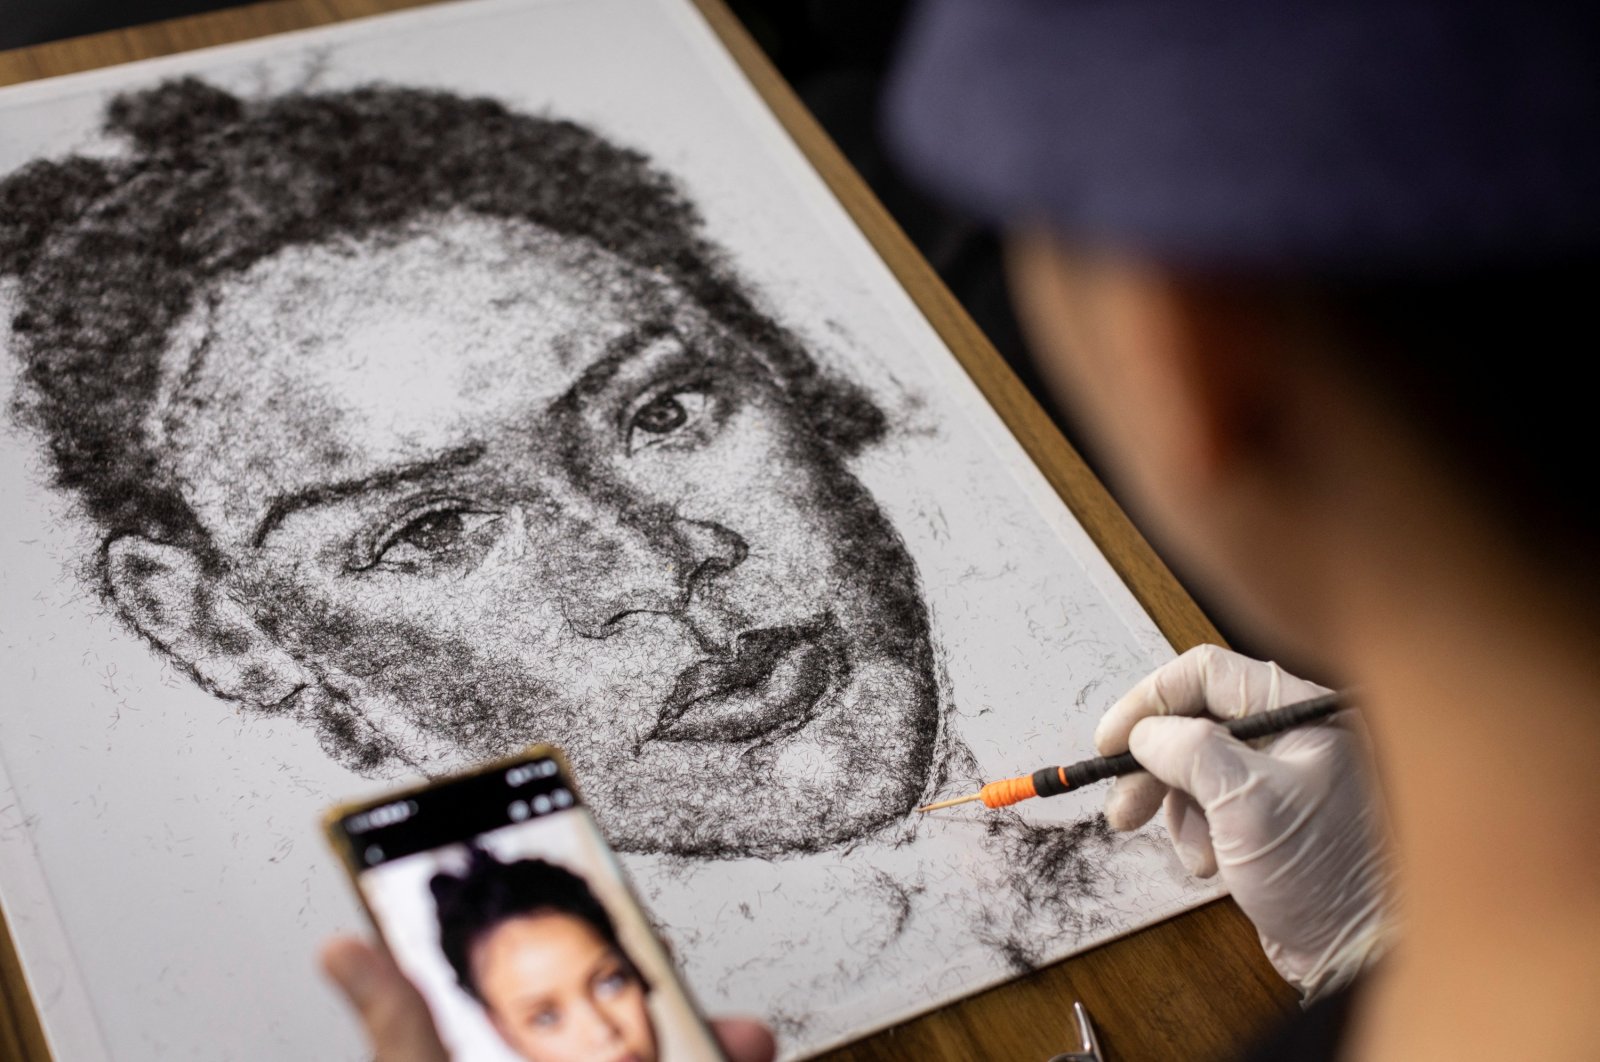 Artist and Filipino seafarer Jesstoni Garcia works on a portrait of Rihanna, made out of human hair, in San Juan City, Philippines, March 10, 2022. (REUTERS)